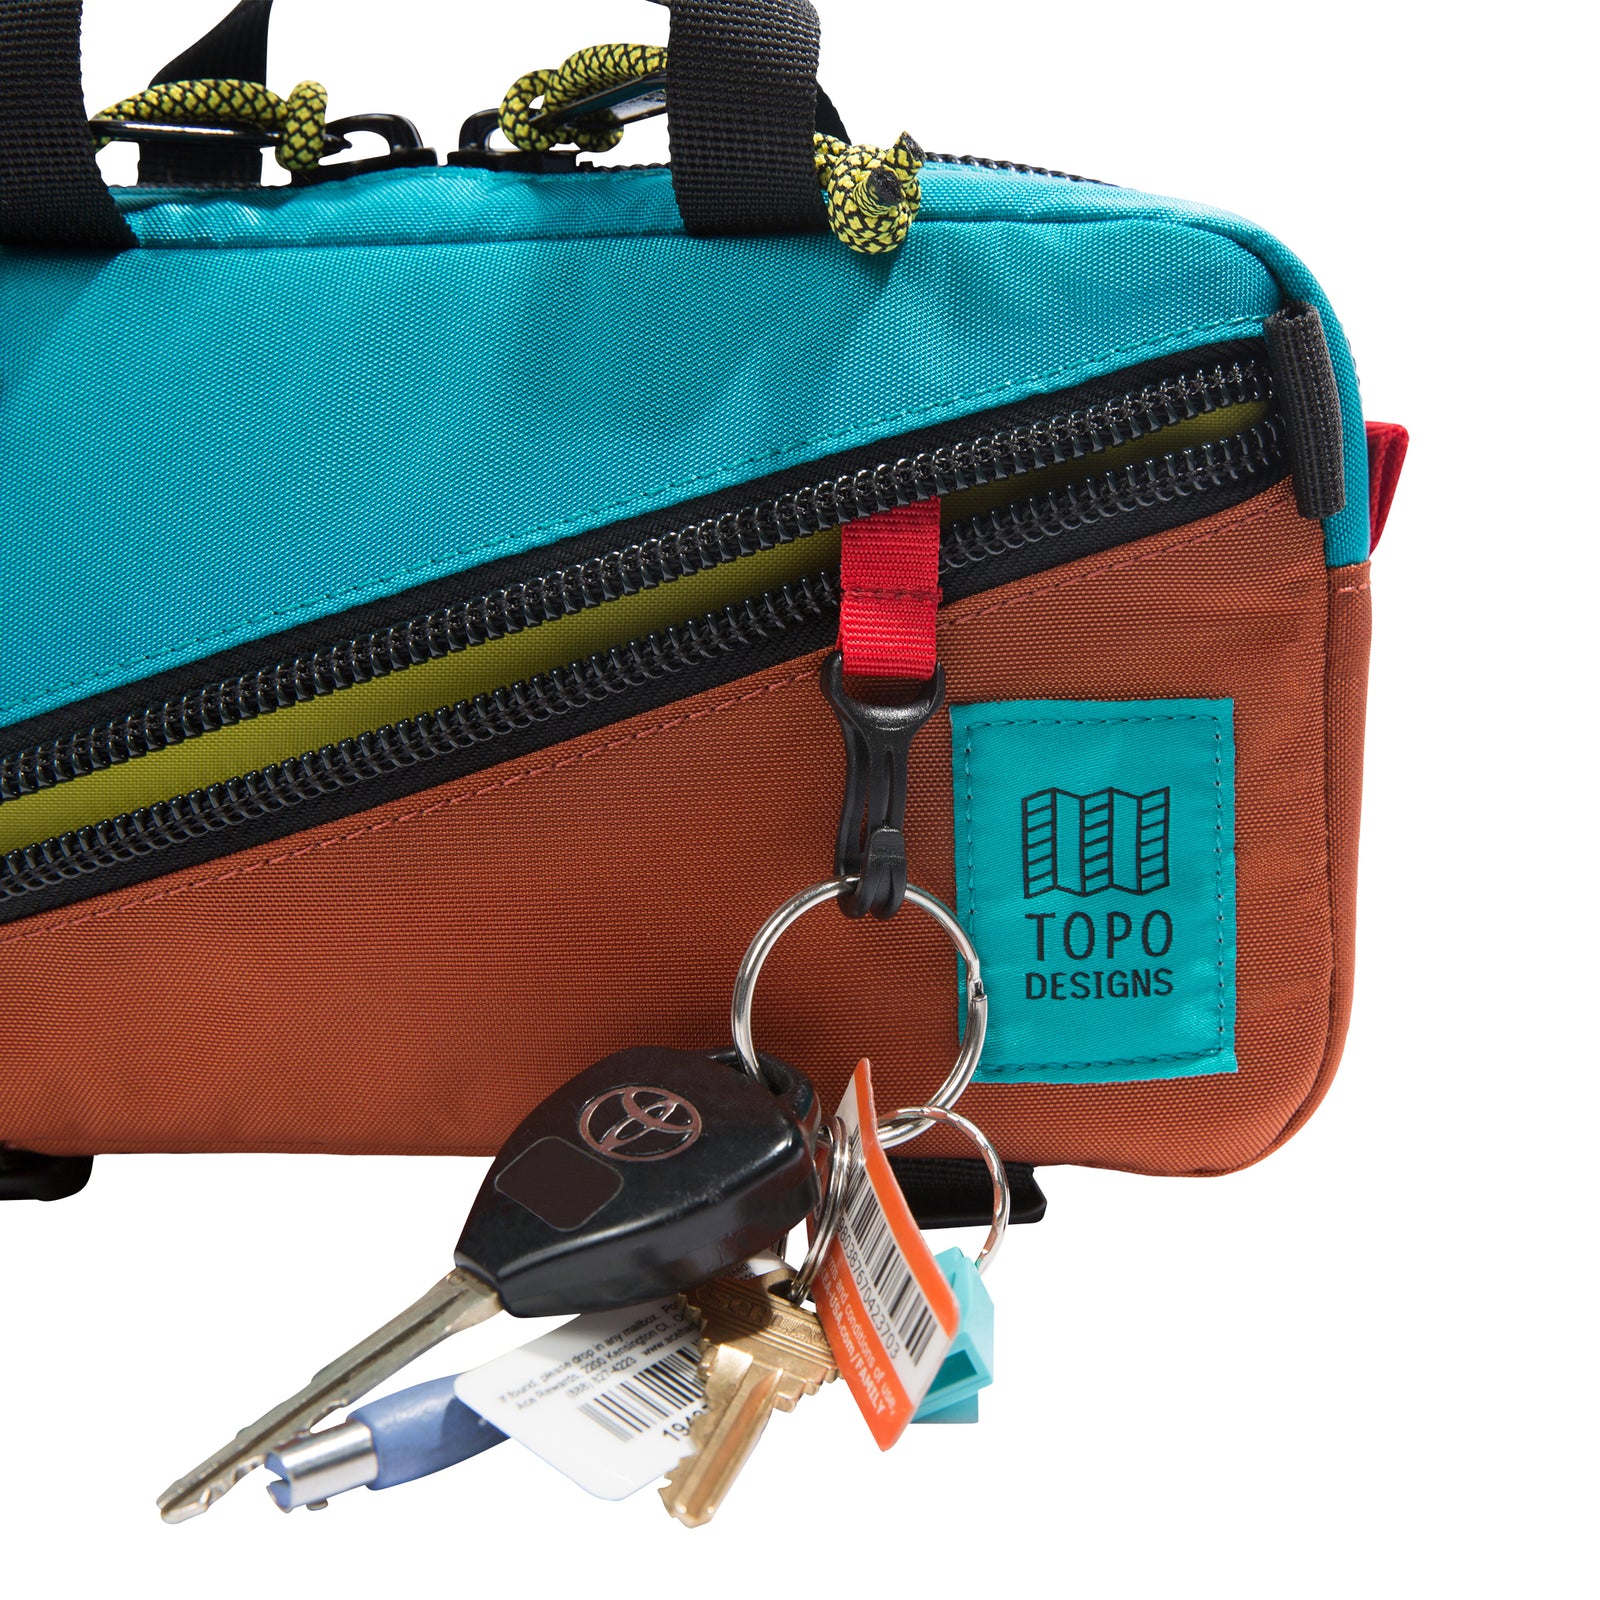 General detail shot of Topo Designs Mini Quick Pack in clay/turquoise showing external diagonal zippered pocket with internal key clip